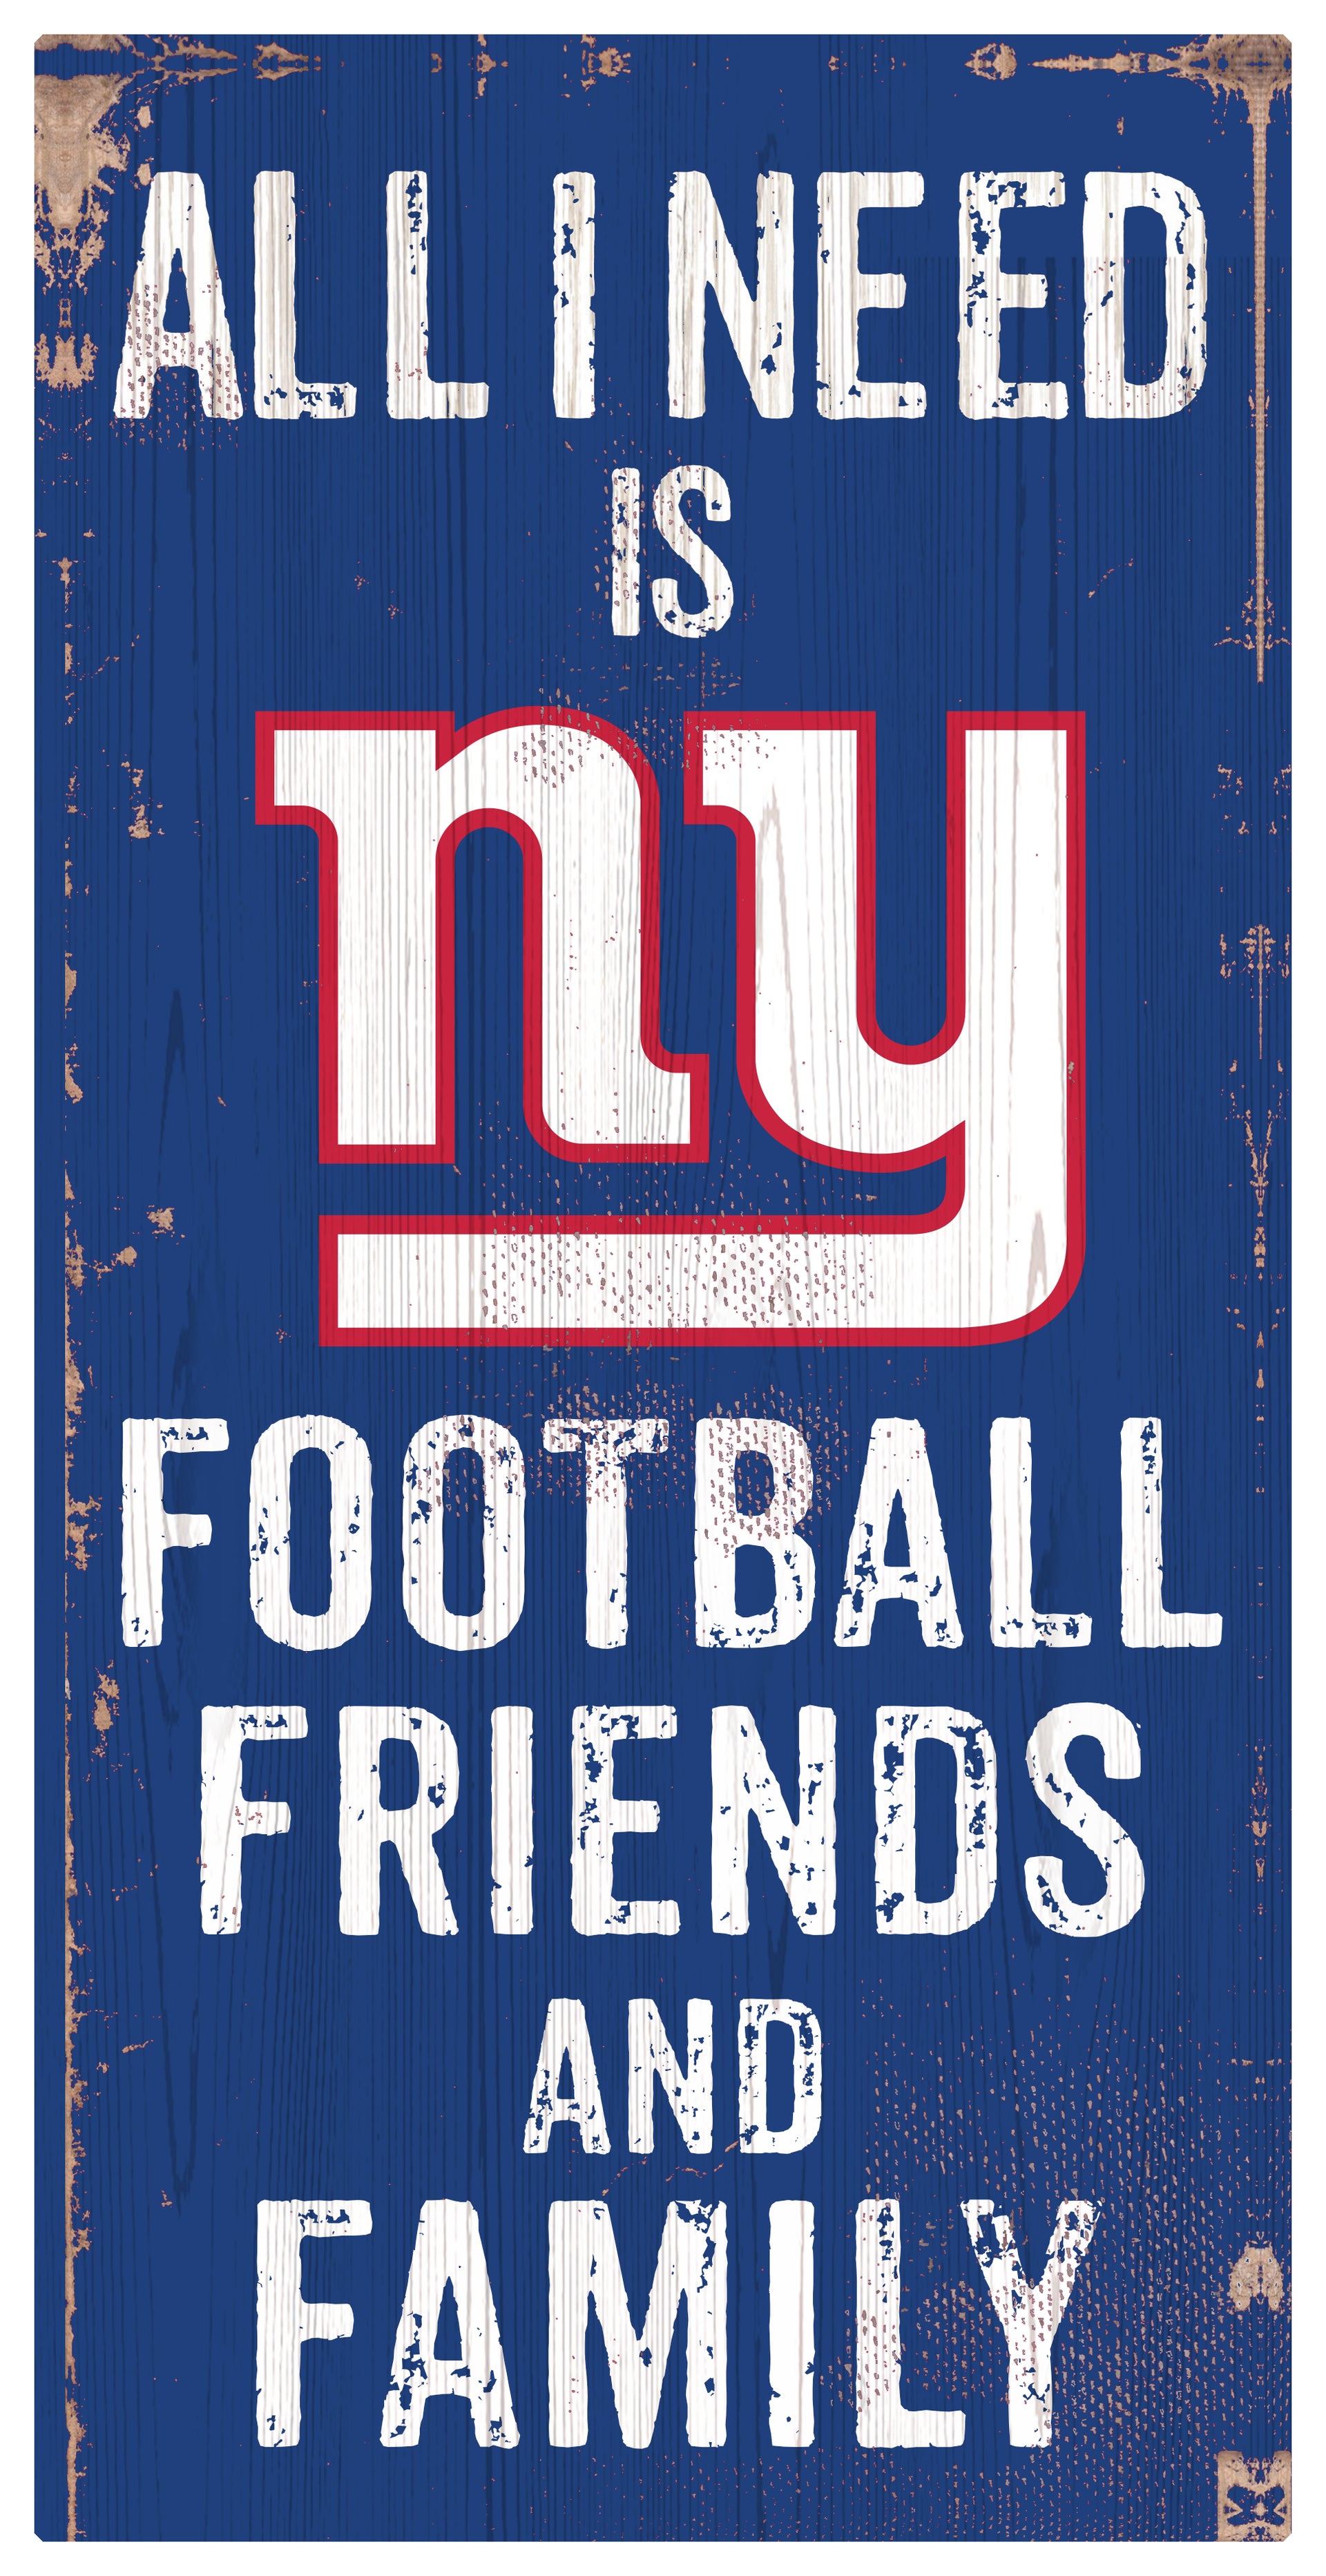 New York Giants Football and My Friends & Family Blue Wood Sign - Dynasty Sports & Framing 